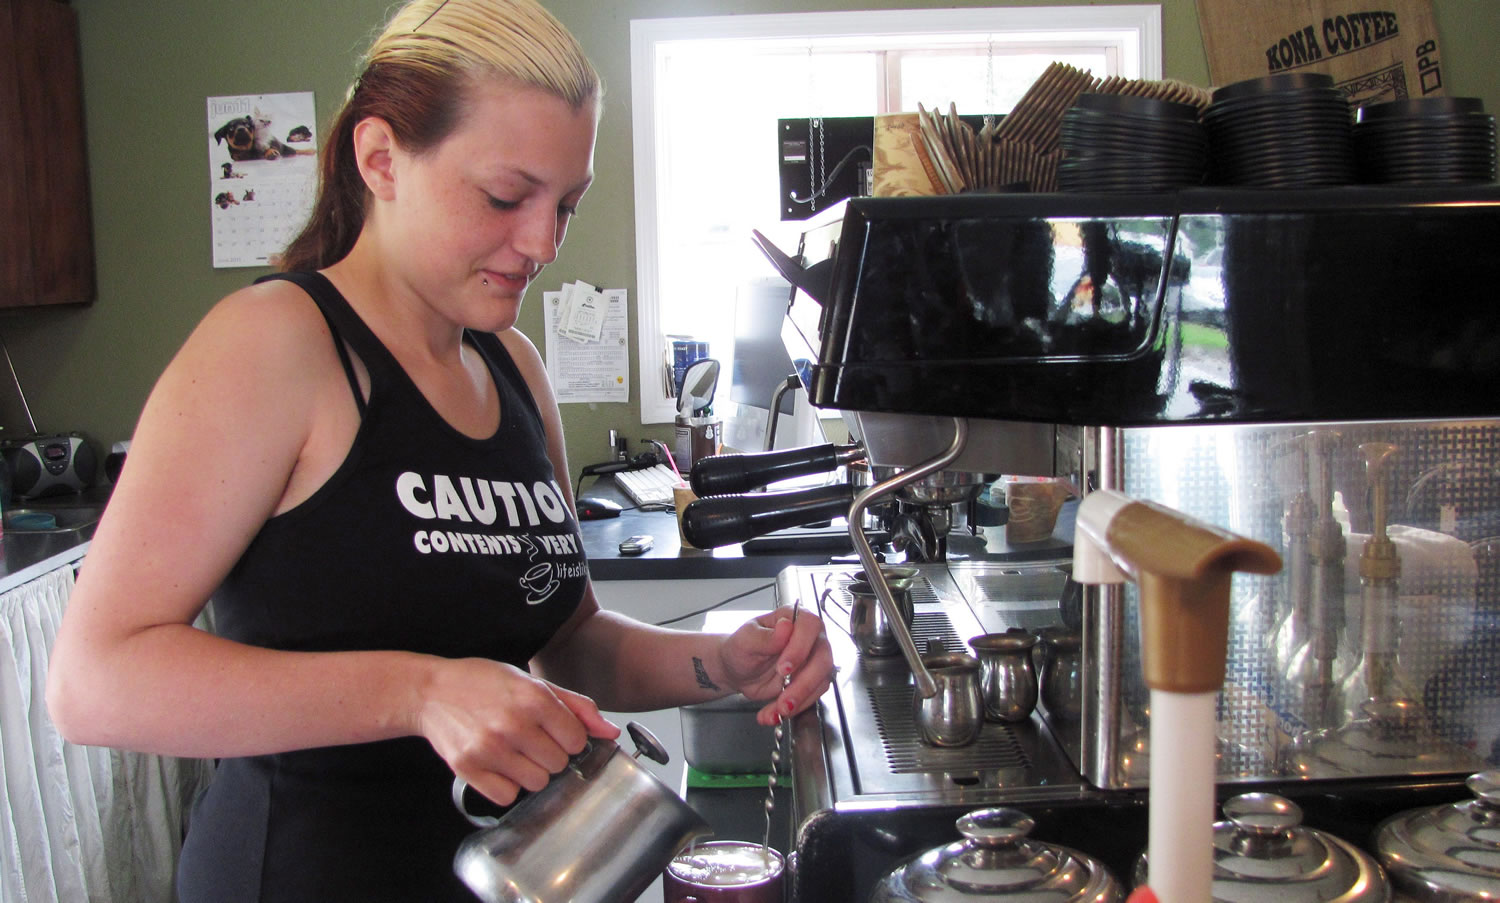 Paige McKnight, a barista at Michele's Coffee Corner, in Washougal, makes a white chocolate caramel mocha Monday. The &quot;E&quot; Street business, owned by McKnight's mother Michele, has experienced a decline in business due to the economy as well as recent roadwork.